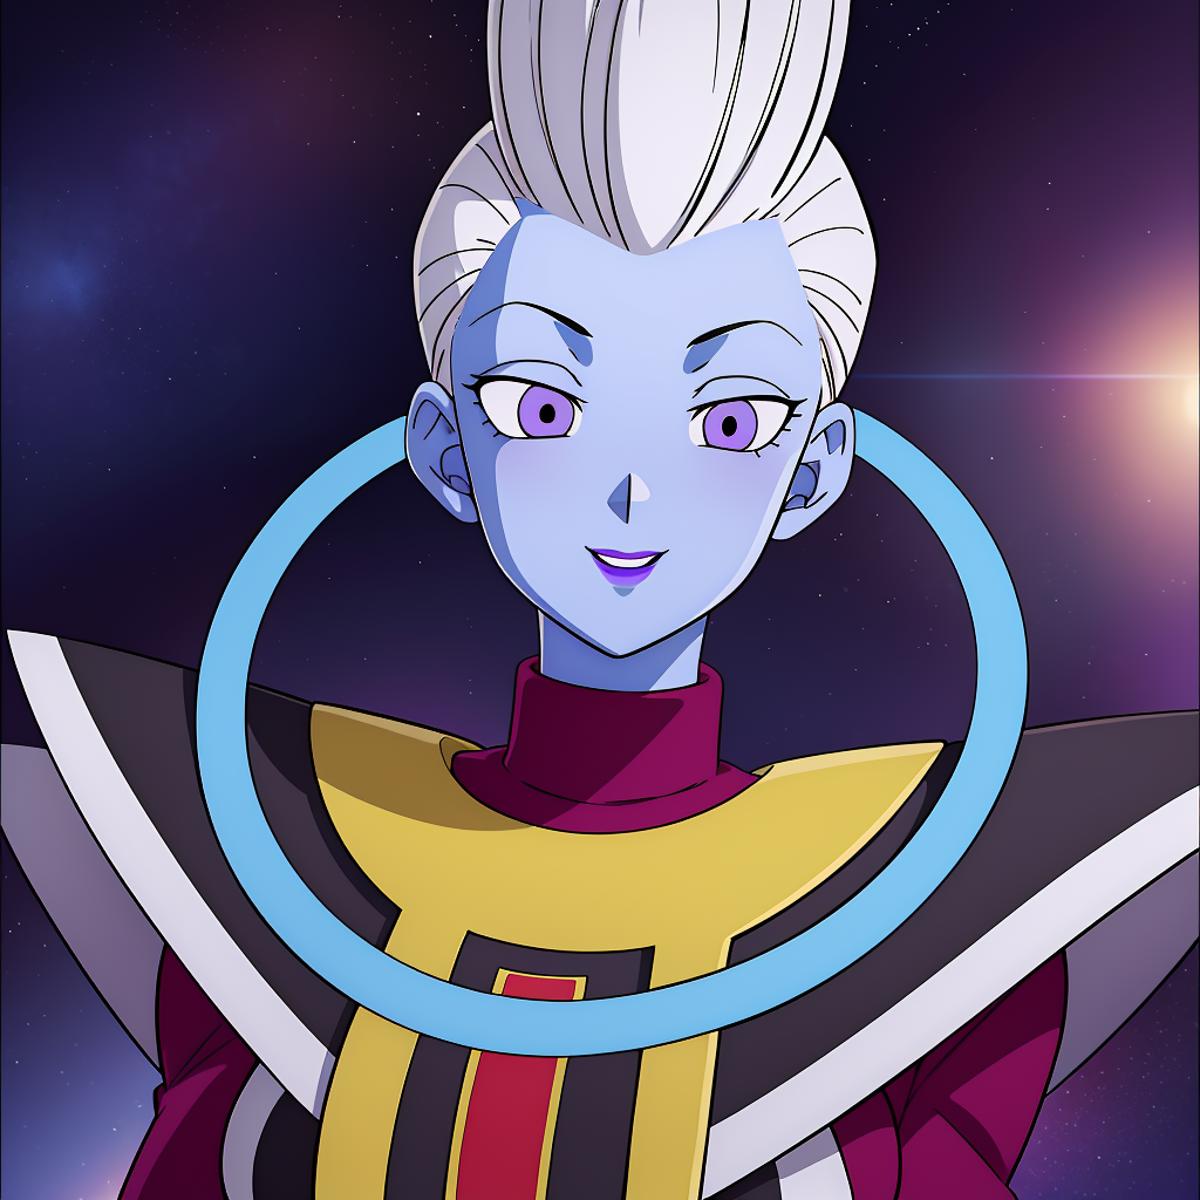 Whis image by infamous__fish